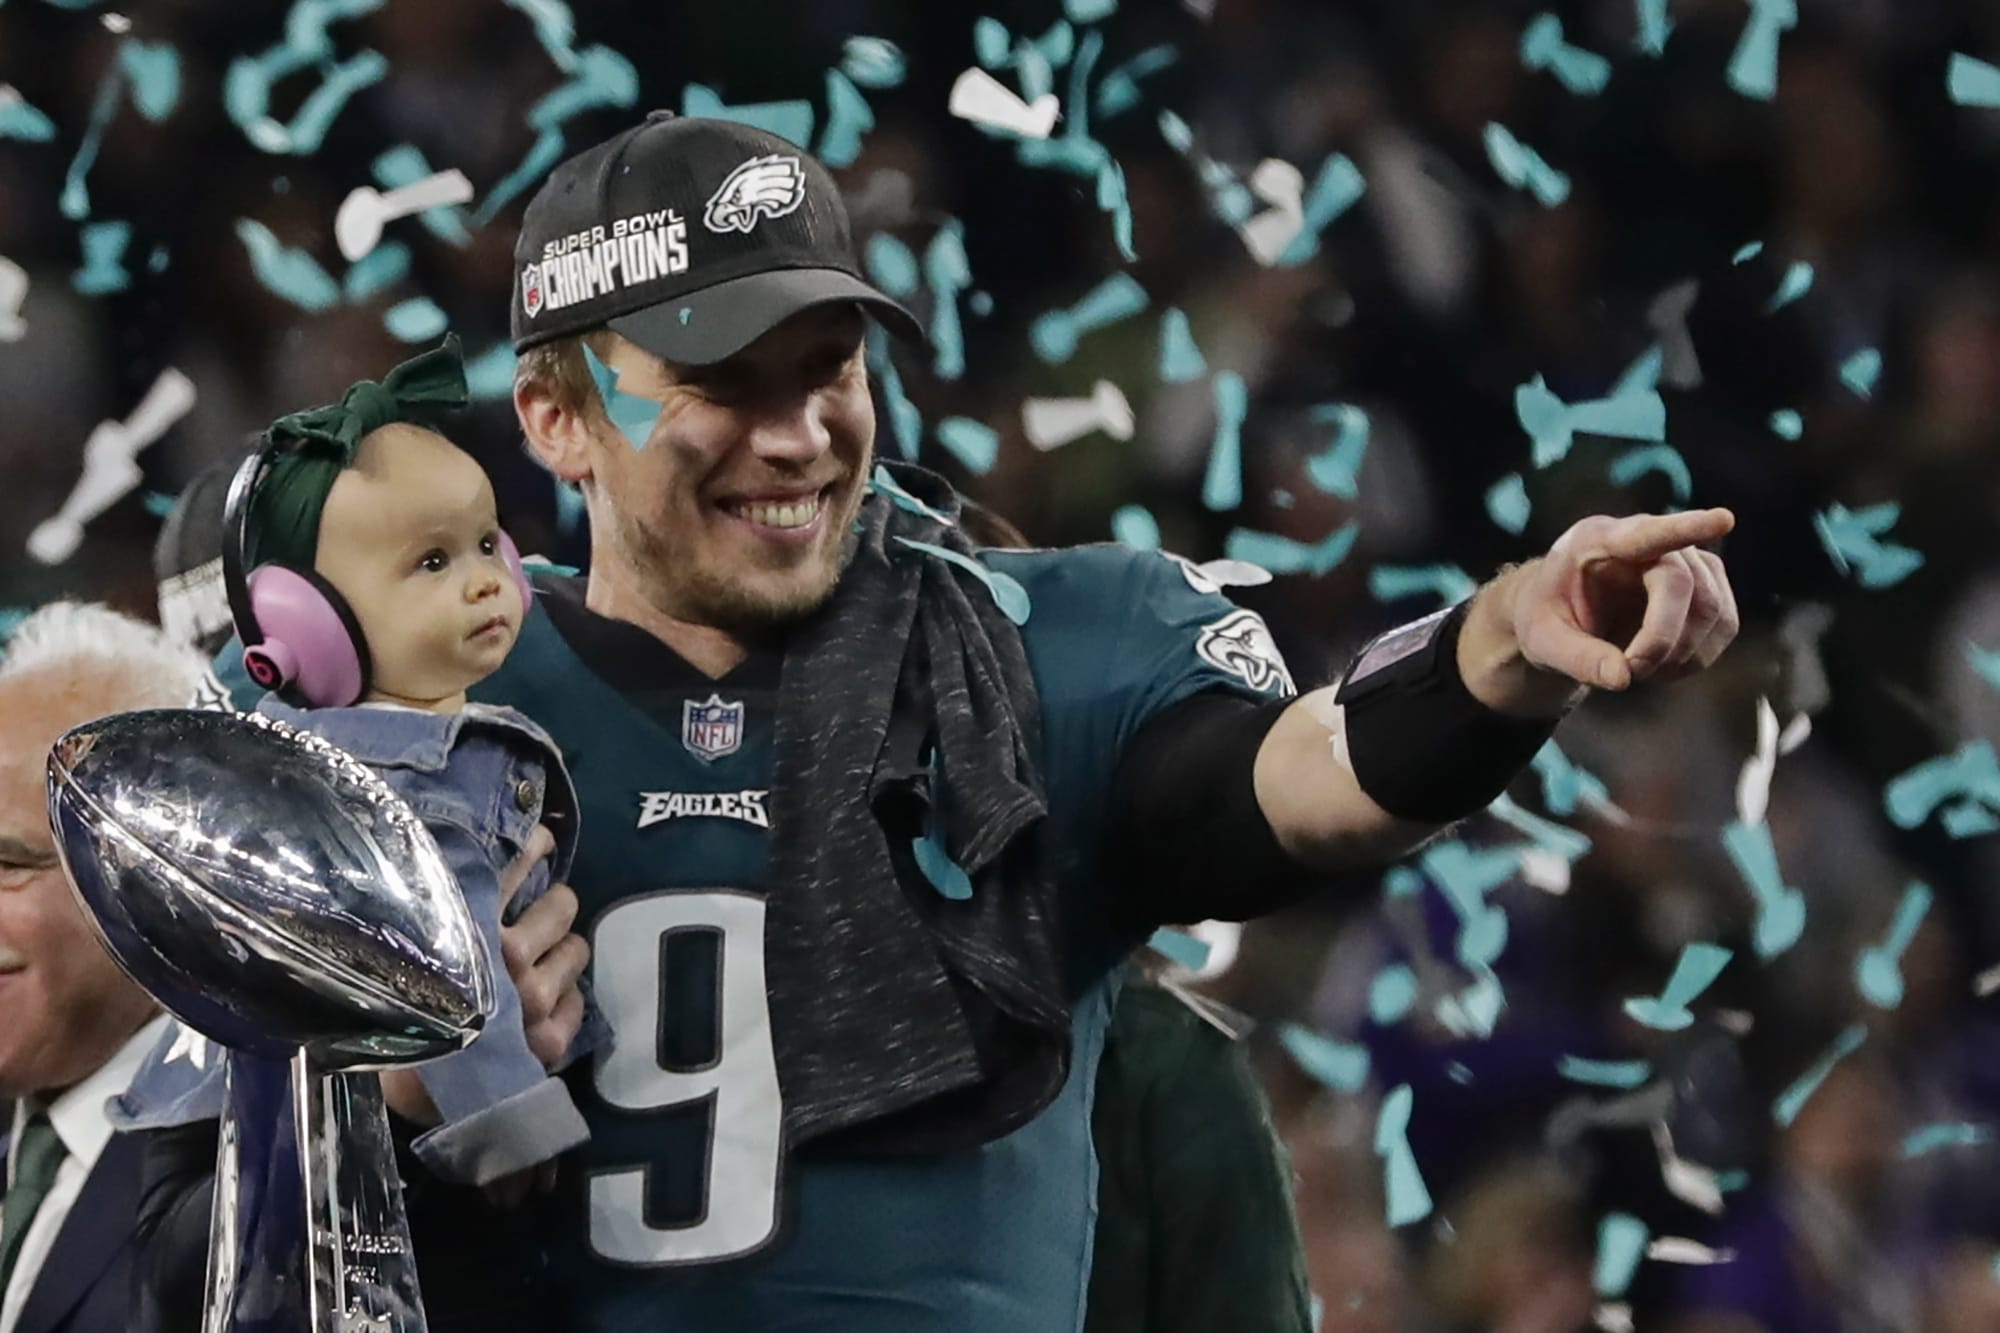 Eagles outlast Patriots for 1st Super Bowl, 41-33 - The Columbian